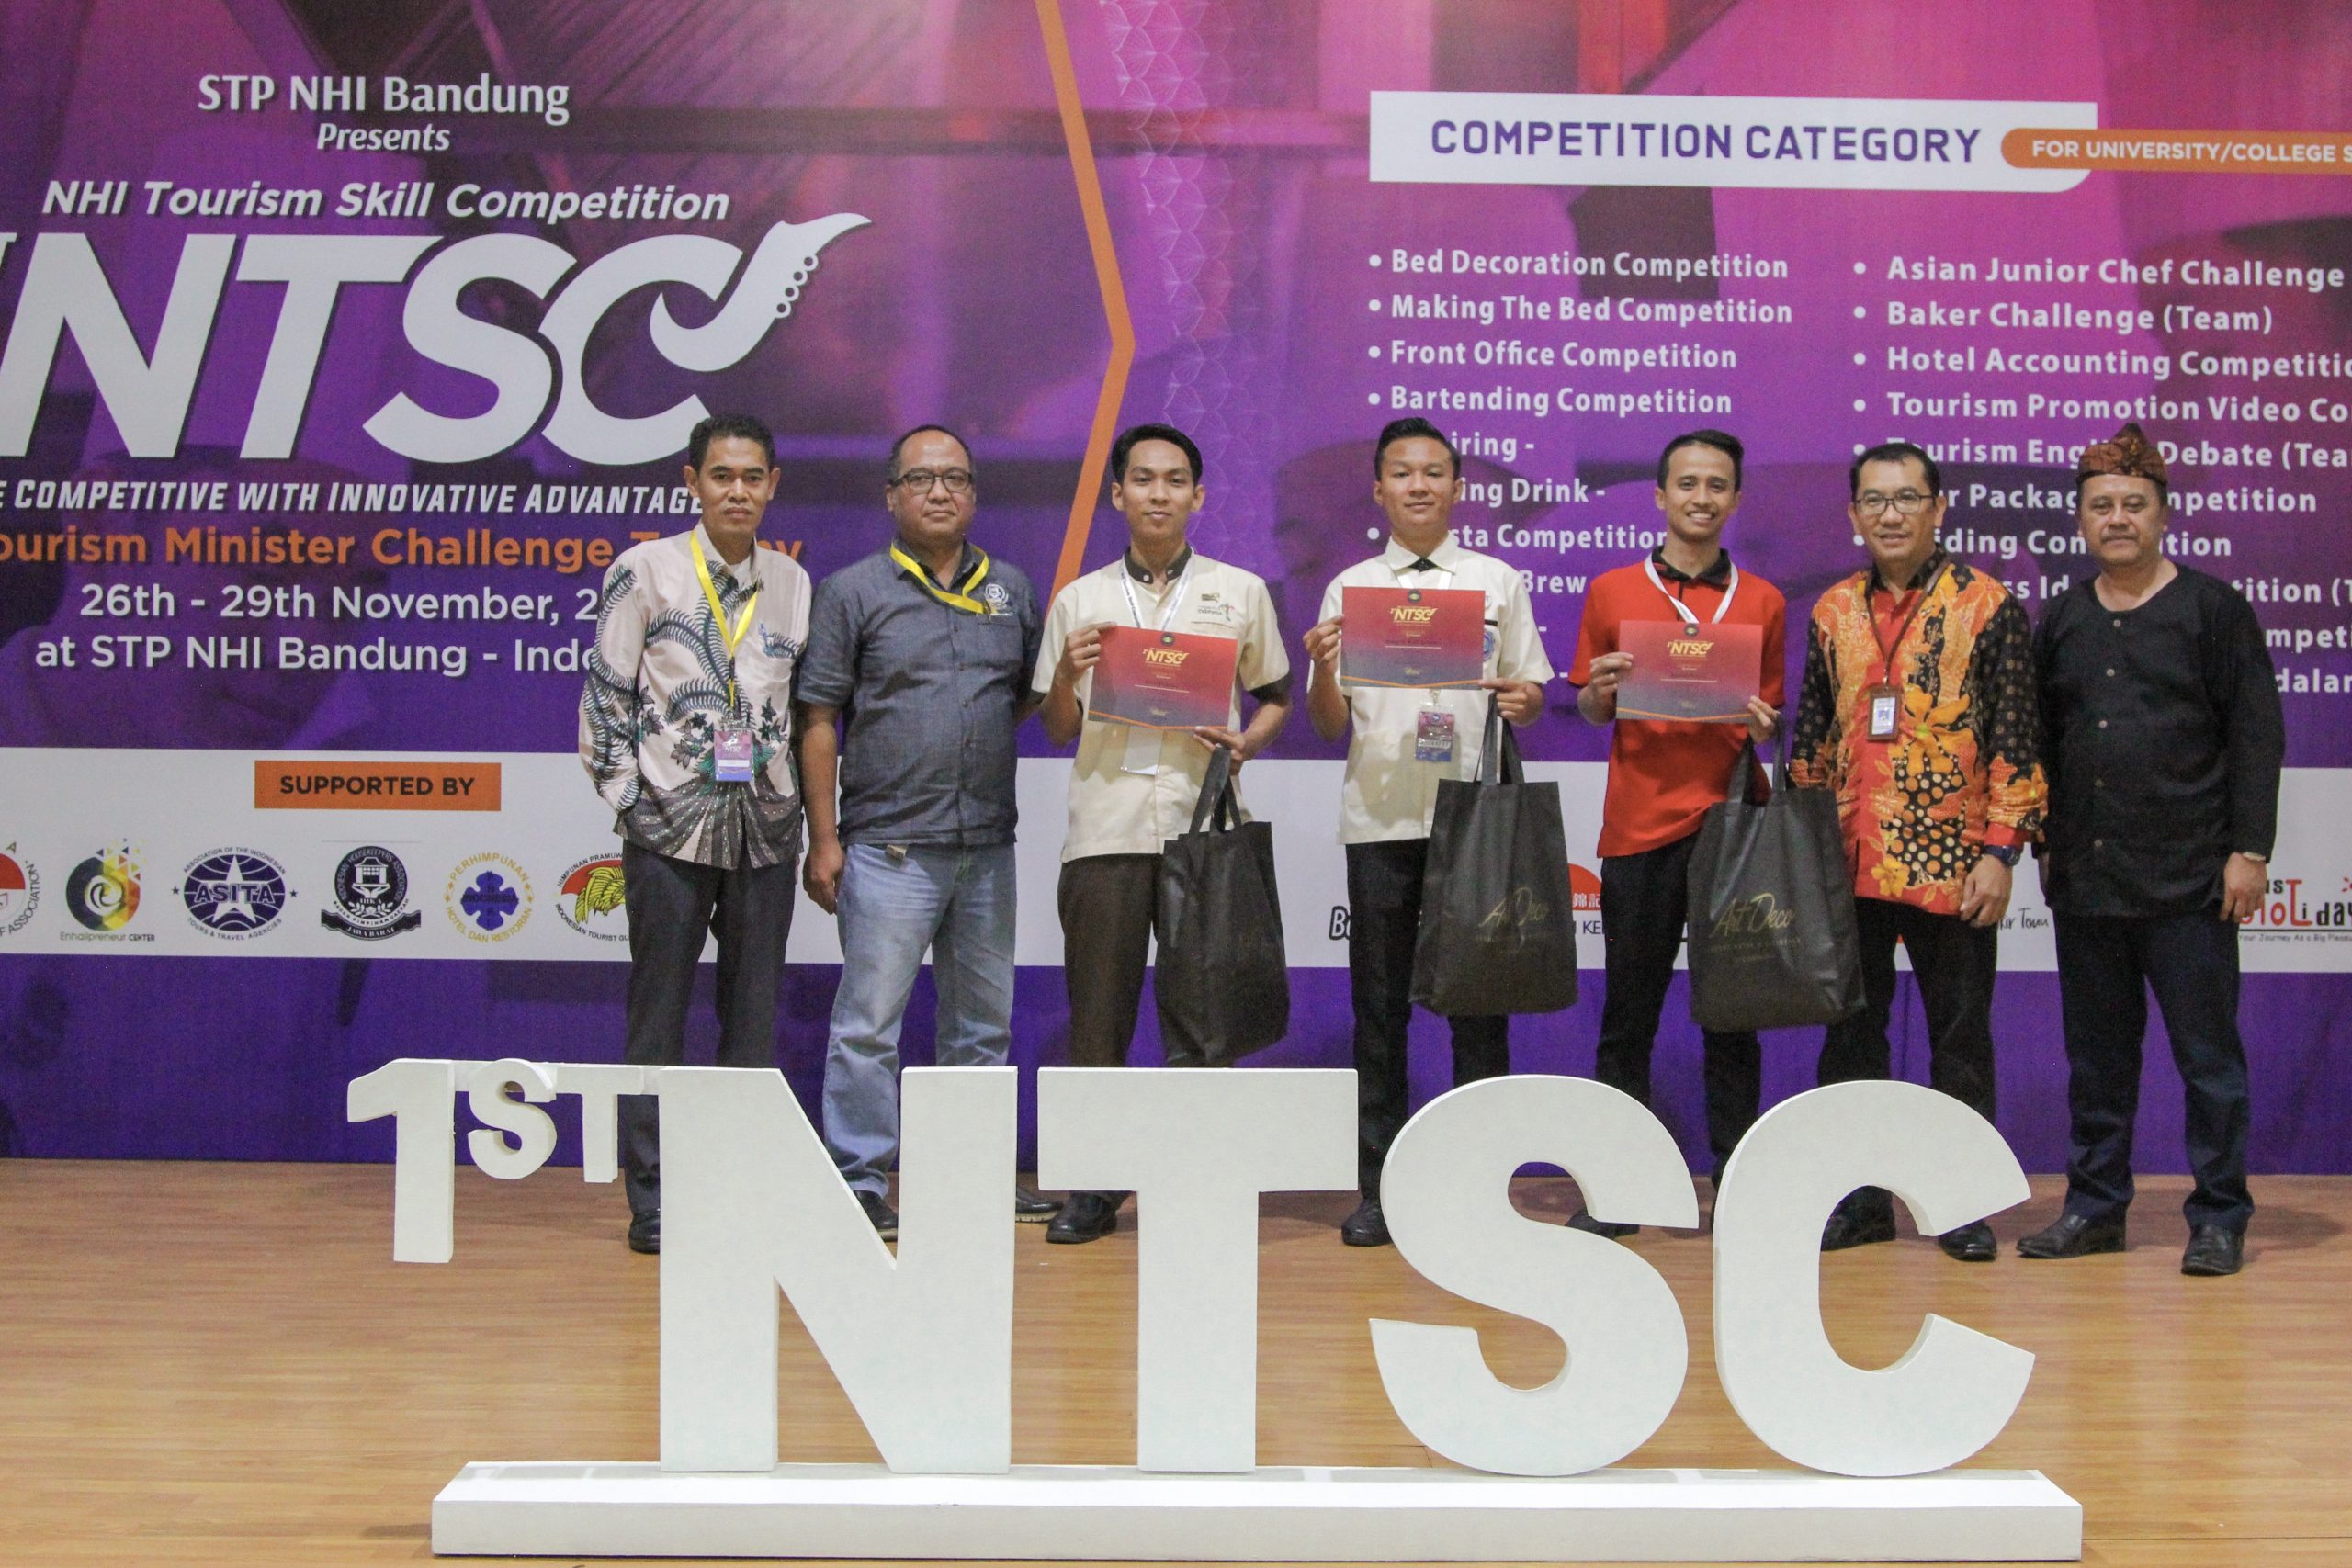 D3 – Hospitality Wins 3rd Place for Making Bed in the 1st NTSC Competition at STP NHI Bandung